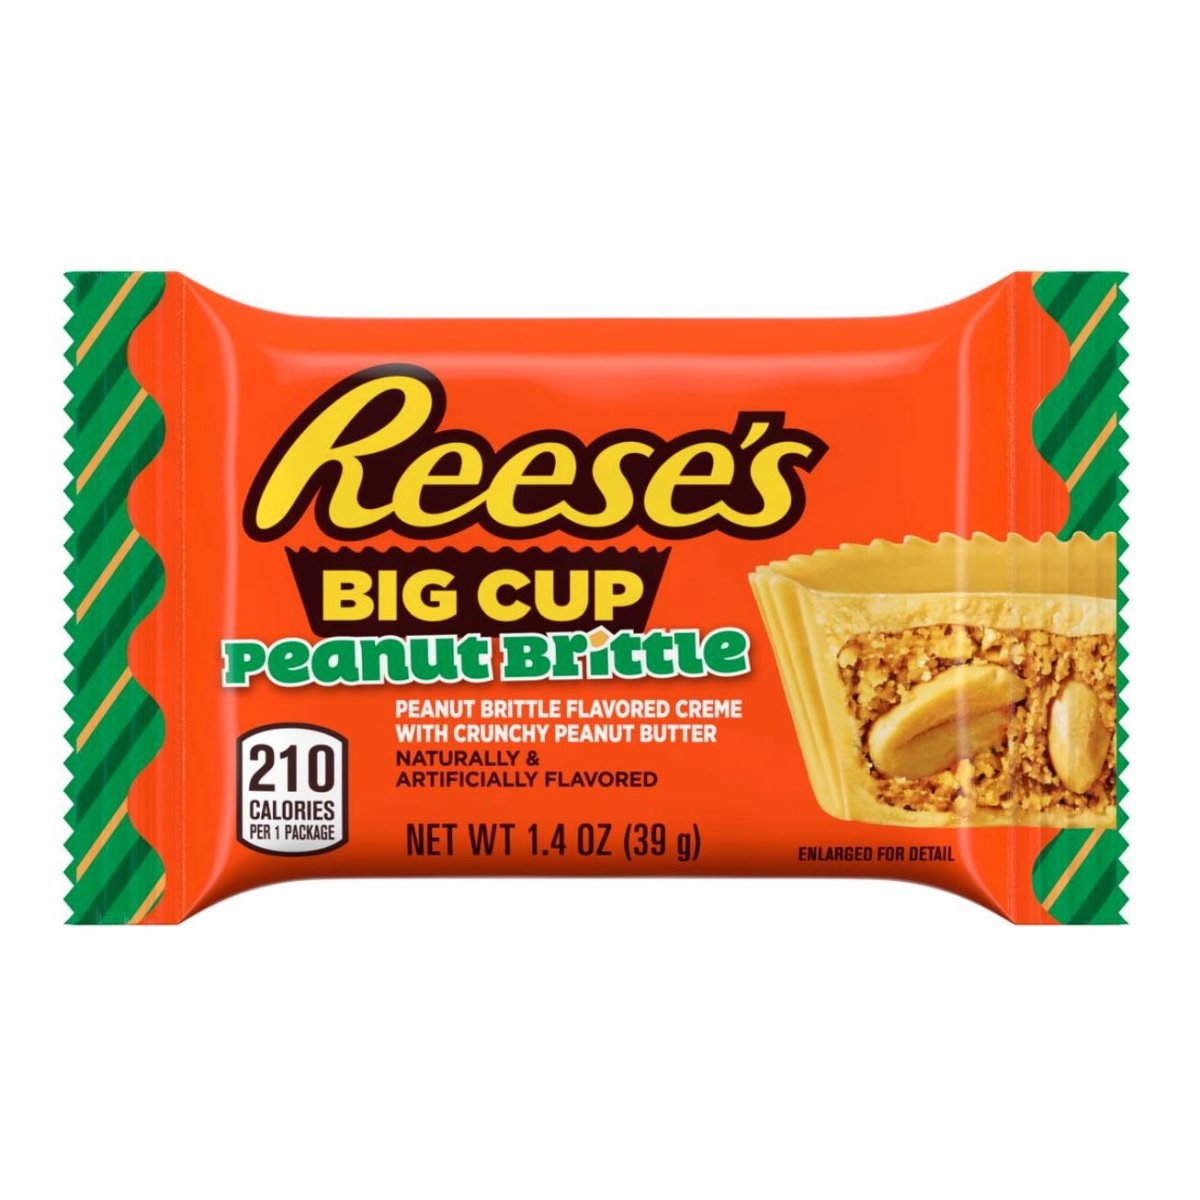 Reese's Big Cup Peanut Brittle 39g - Candy Mail UK